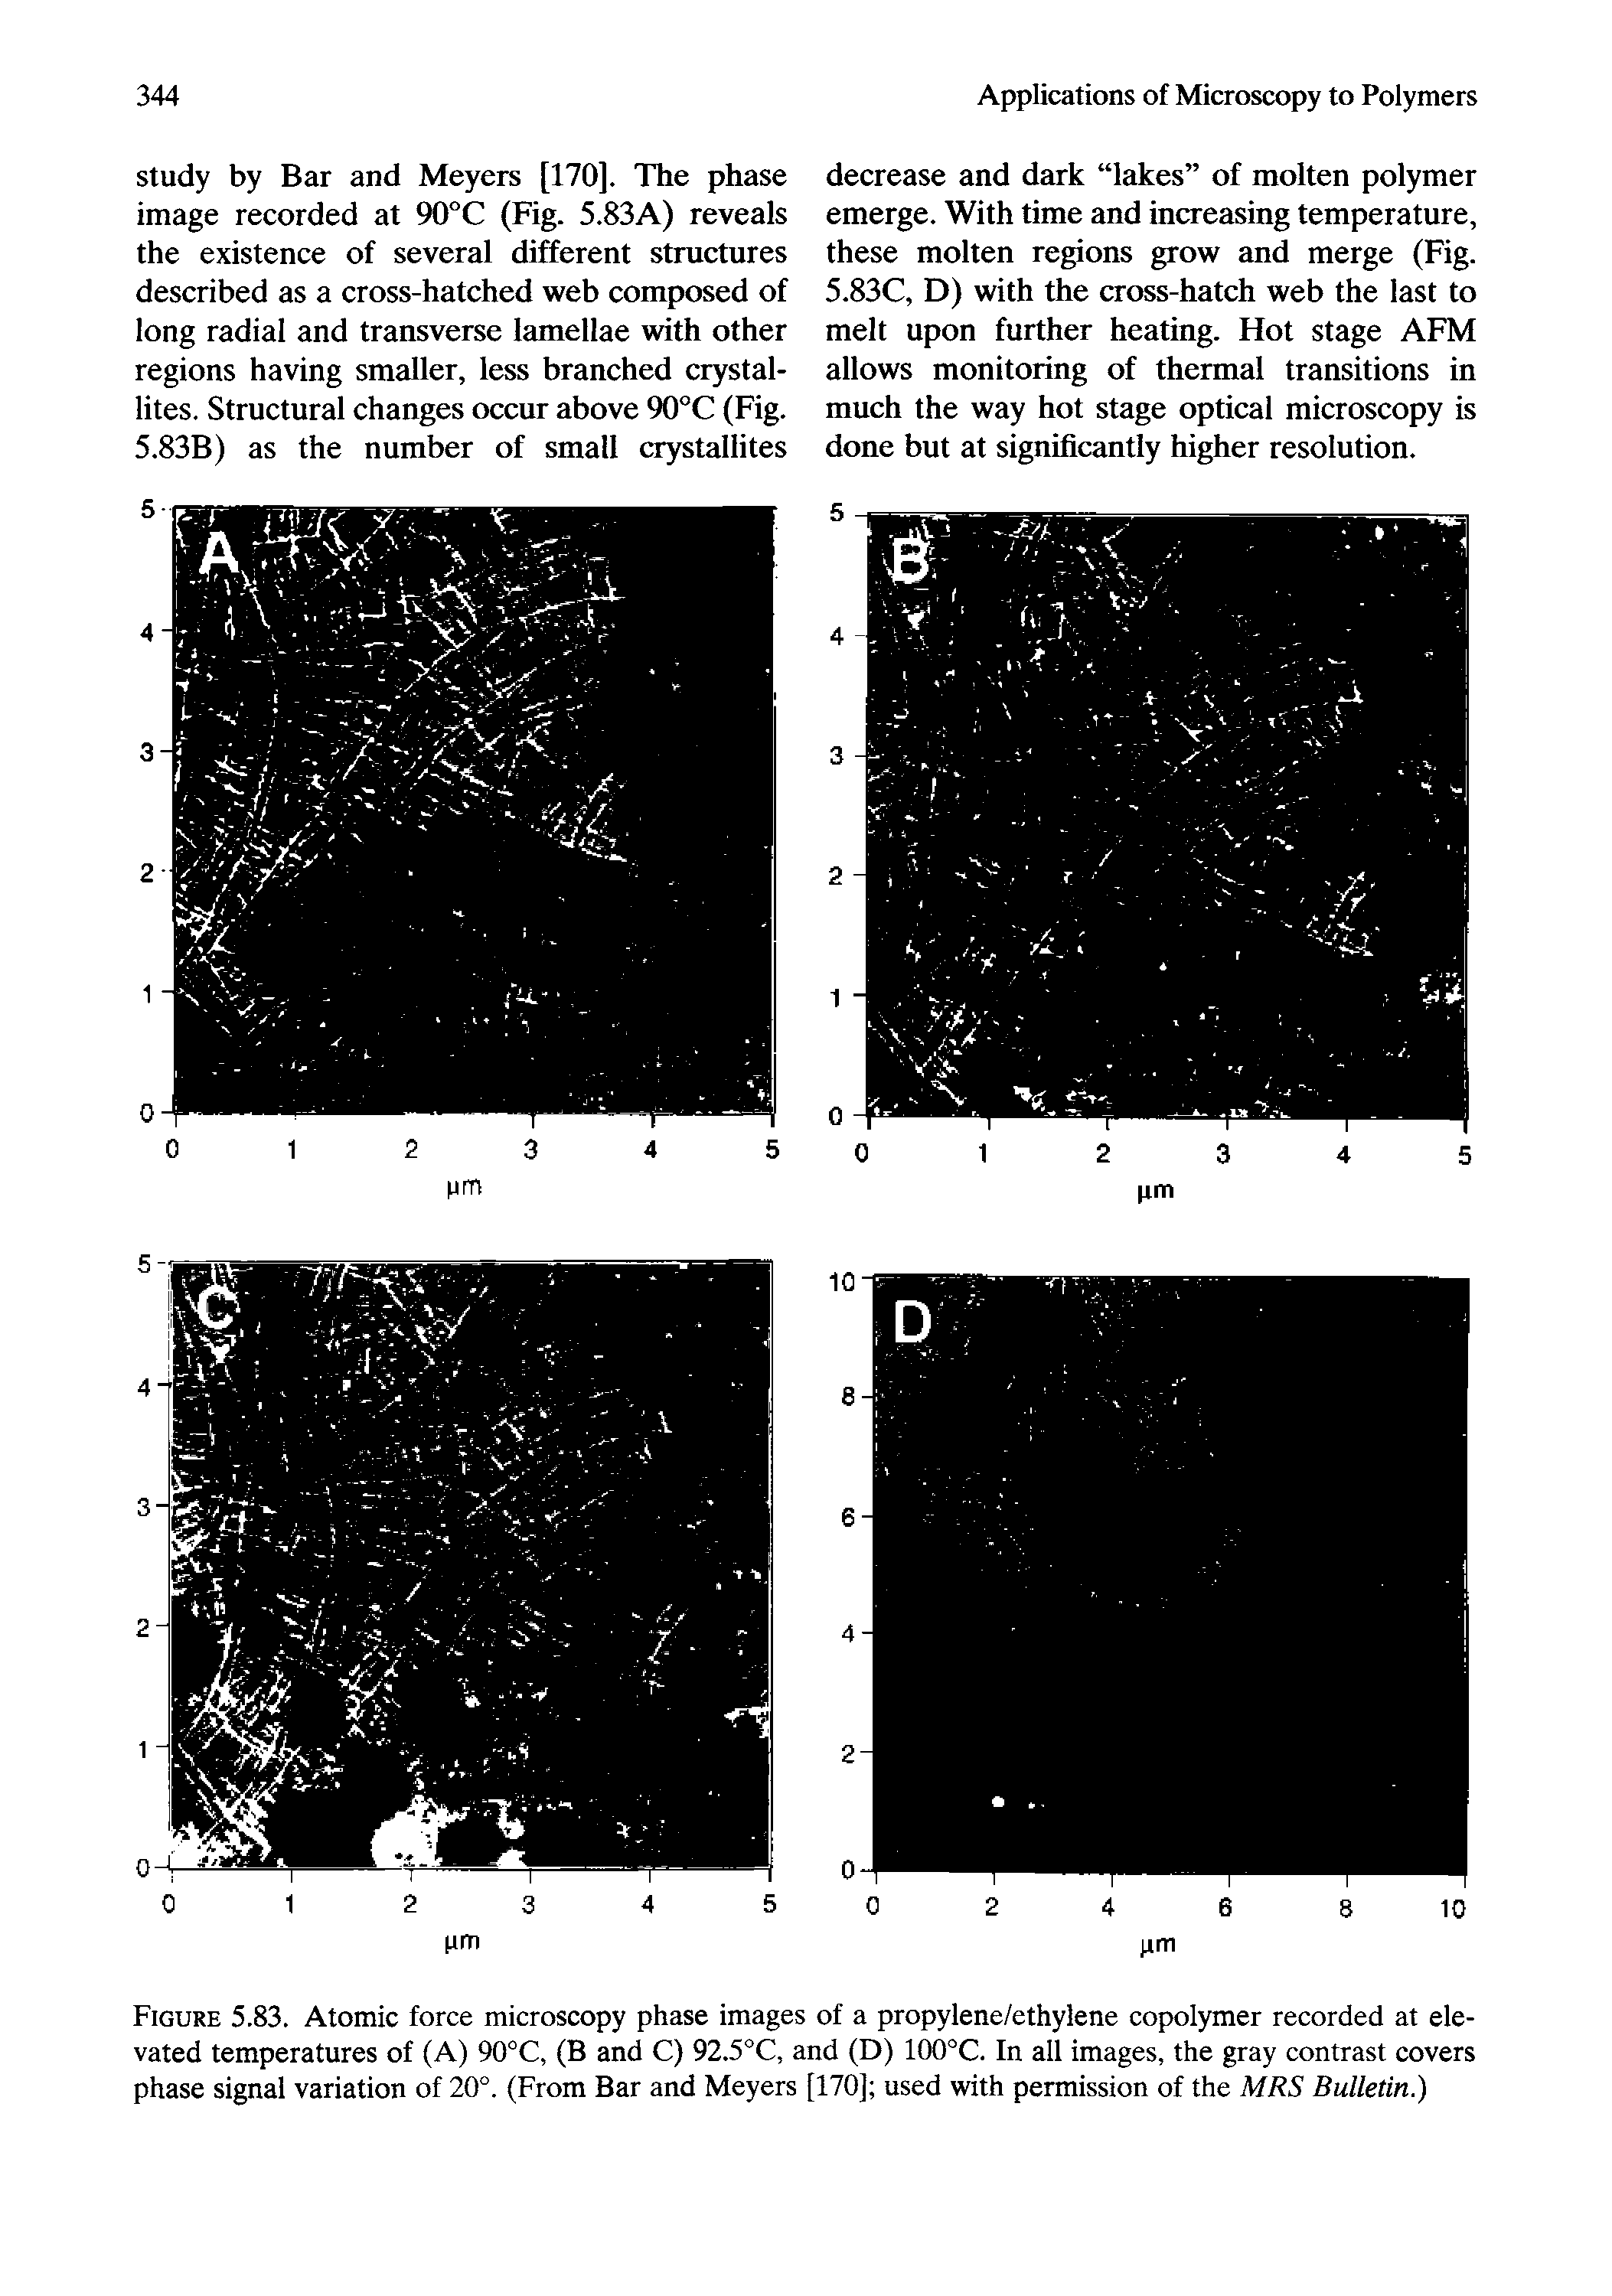 Figure 5.83. Atomic force microscopy phase images of a propylene/ethylene copolymer recorded at elevated temperatures of (A) 90°C, (B and C) 92.5°C, and (D) 100°C. In all images, the gray contrast covers phase signal variation of 20°. (From Bar and Meyers [170] used with permission of the MRS Bulletin.)...